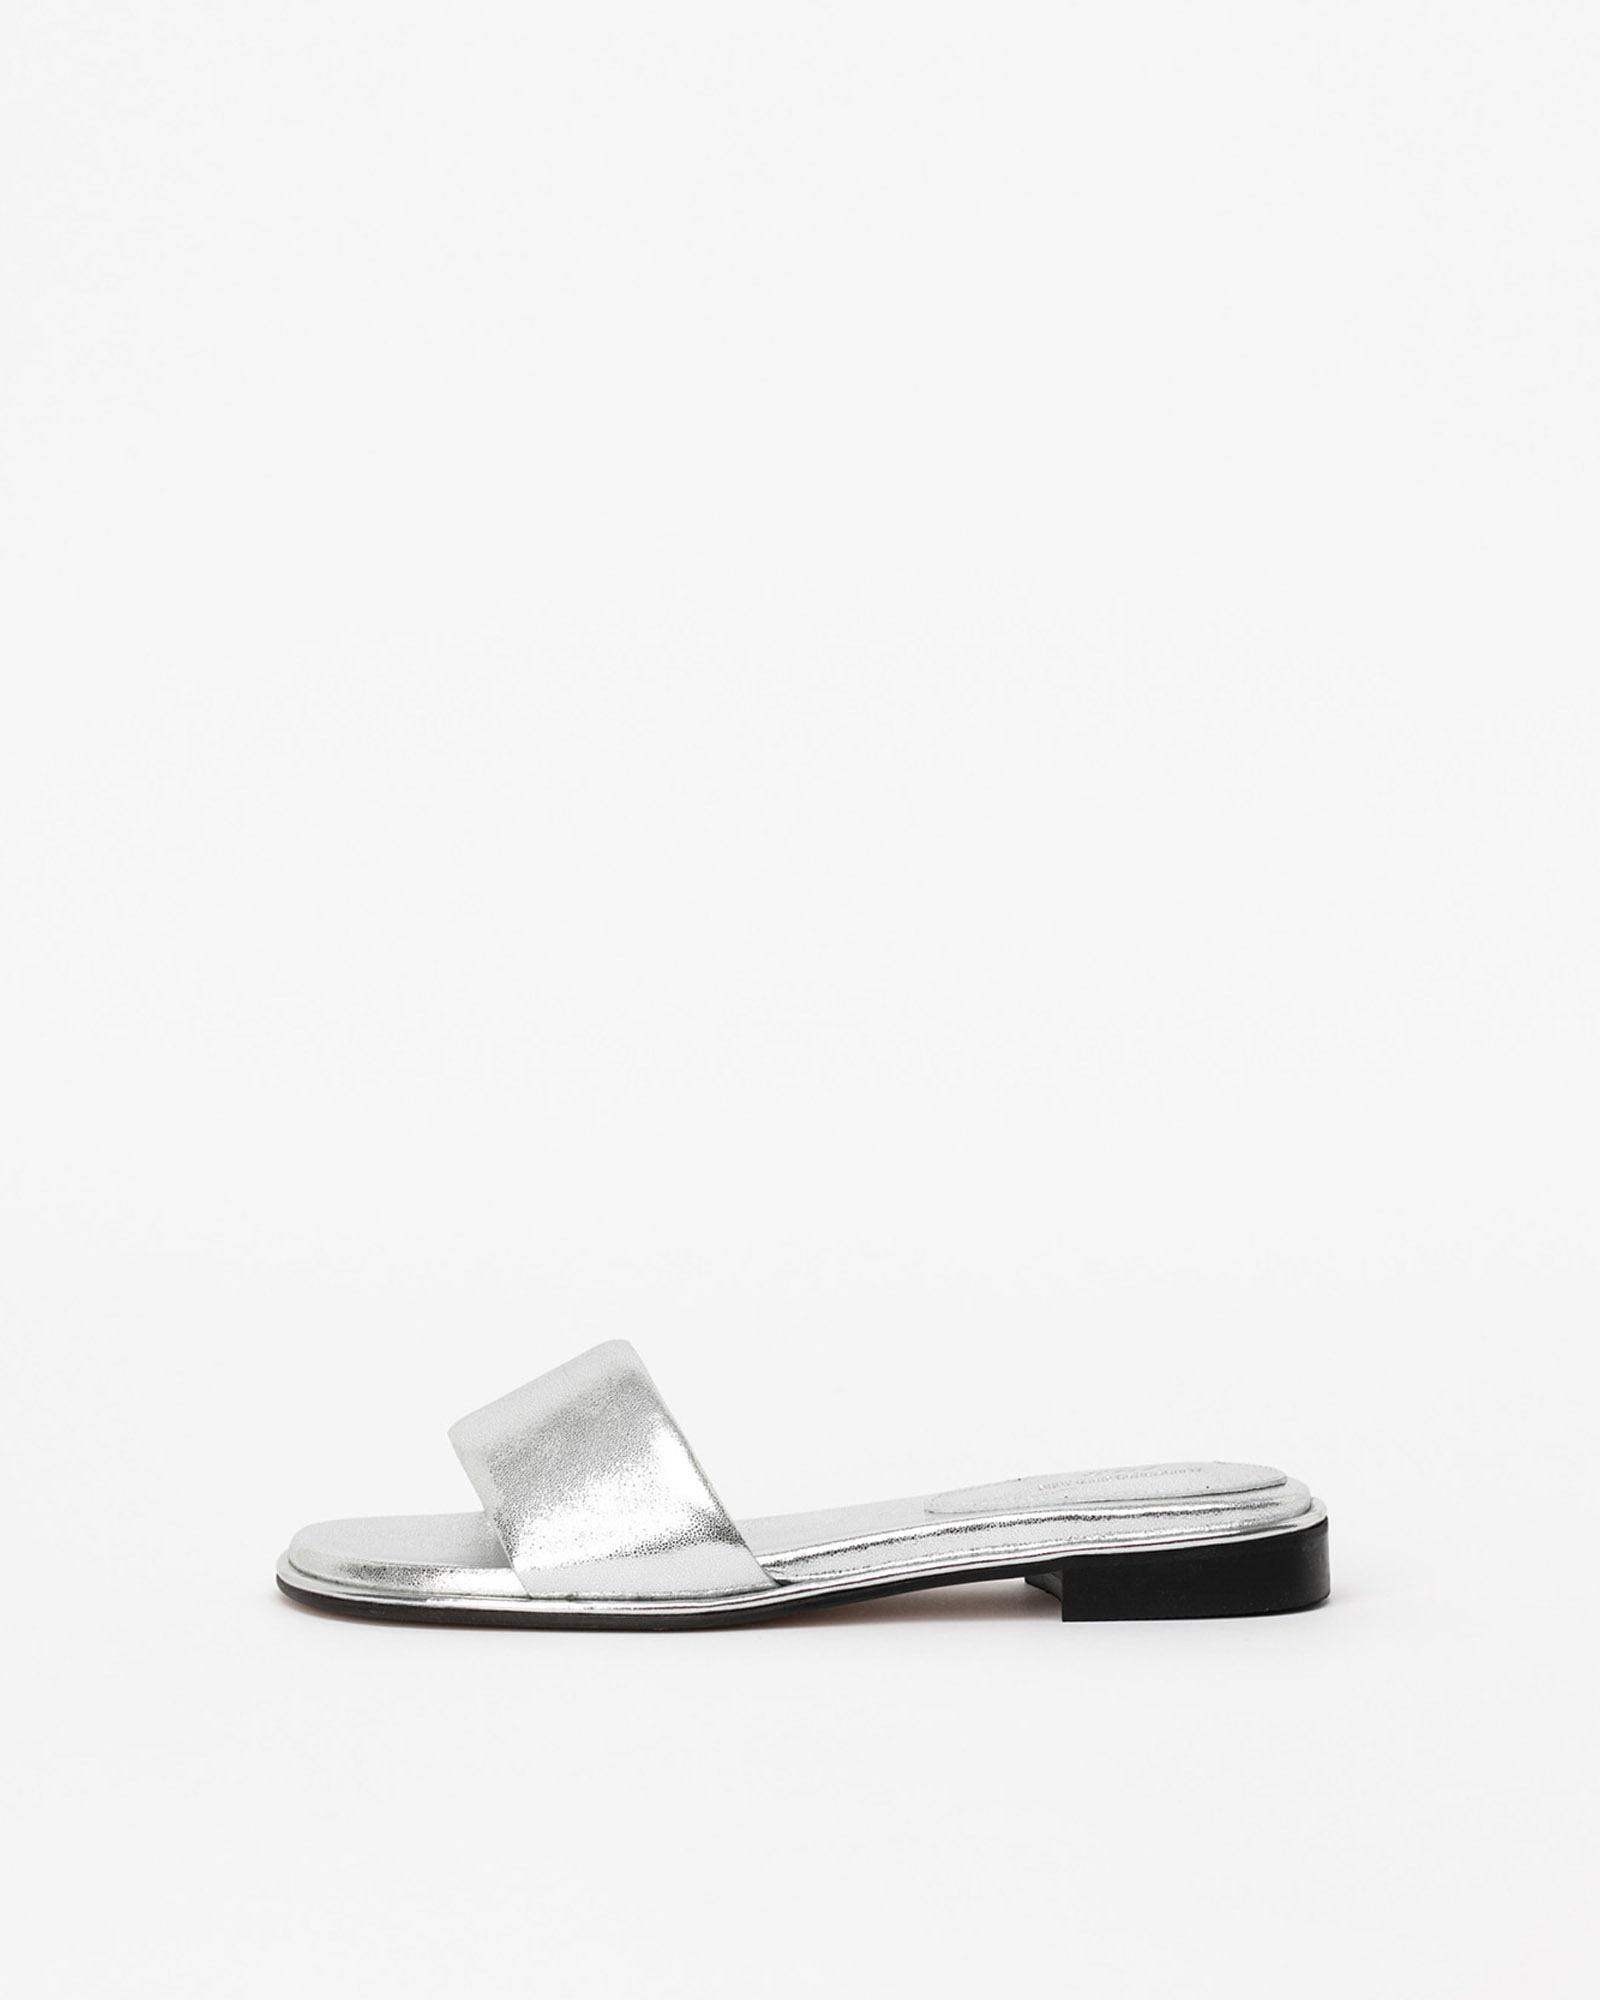 Lasena Padded Slides in Champagne Silver